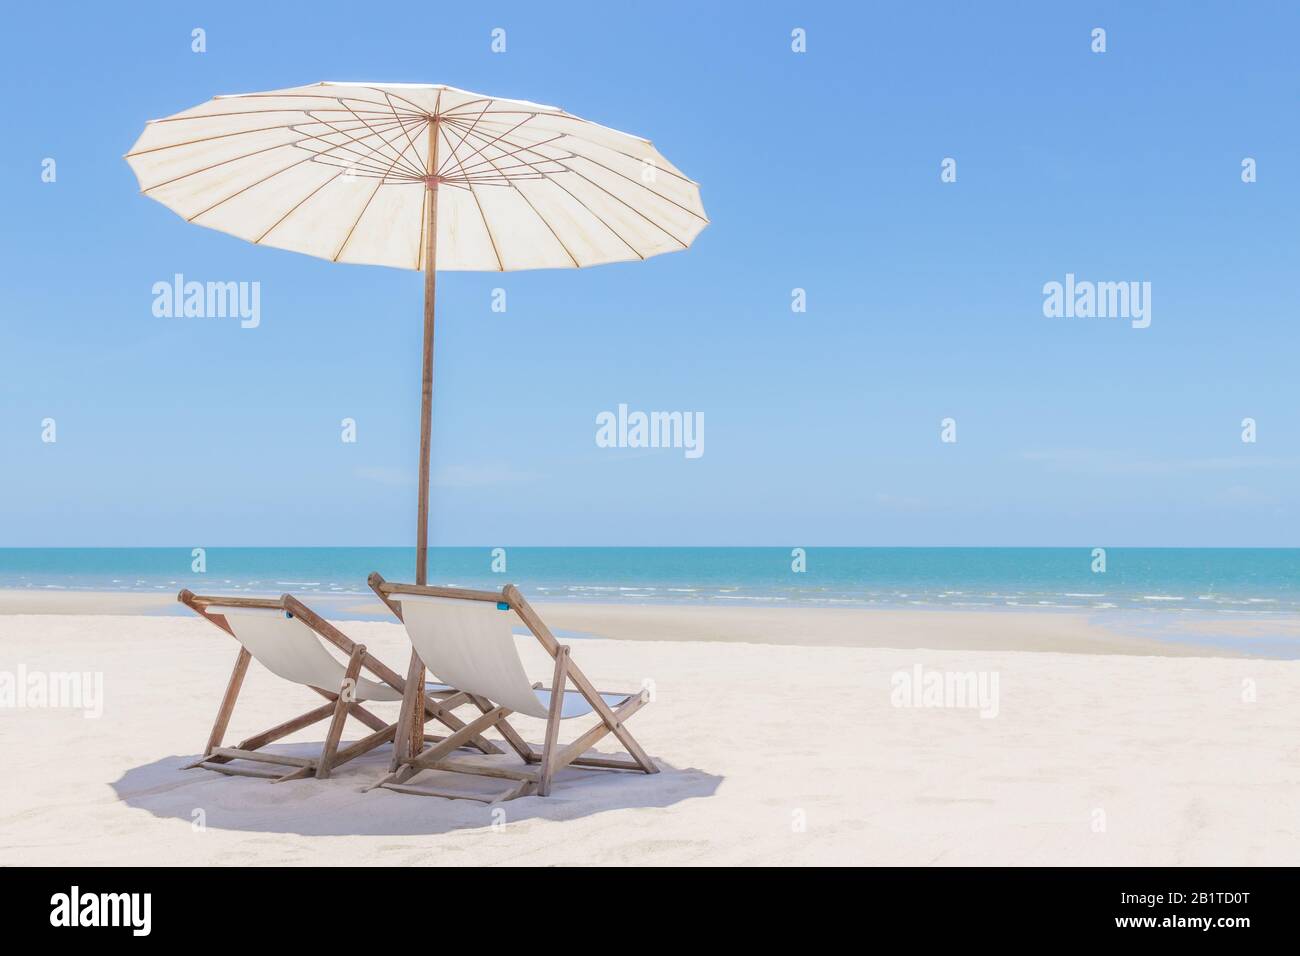 Idyllic tropical beach with white sand, turquoise ocean water and blue sky in huahin thailand Stock Photo